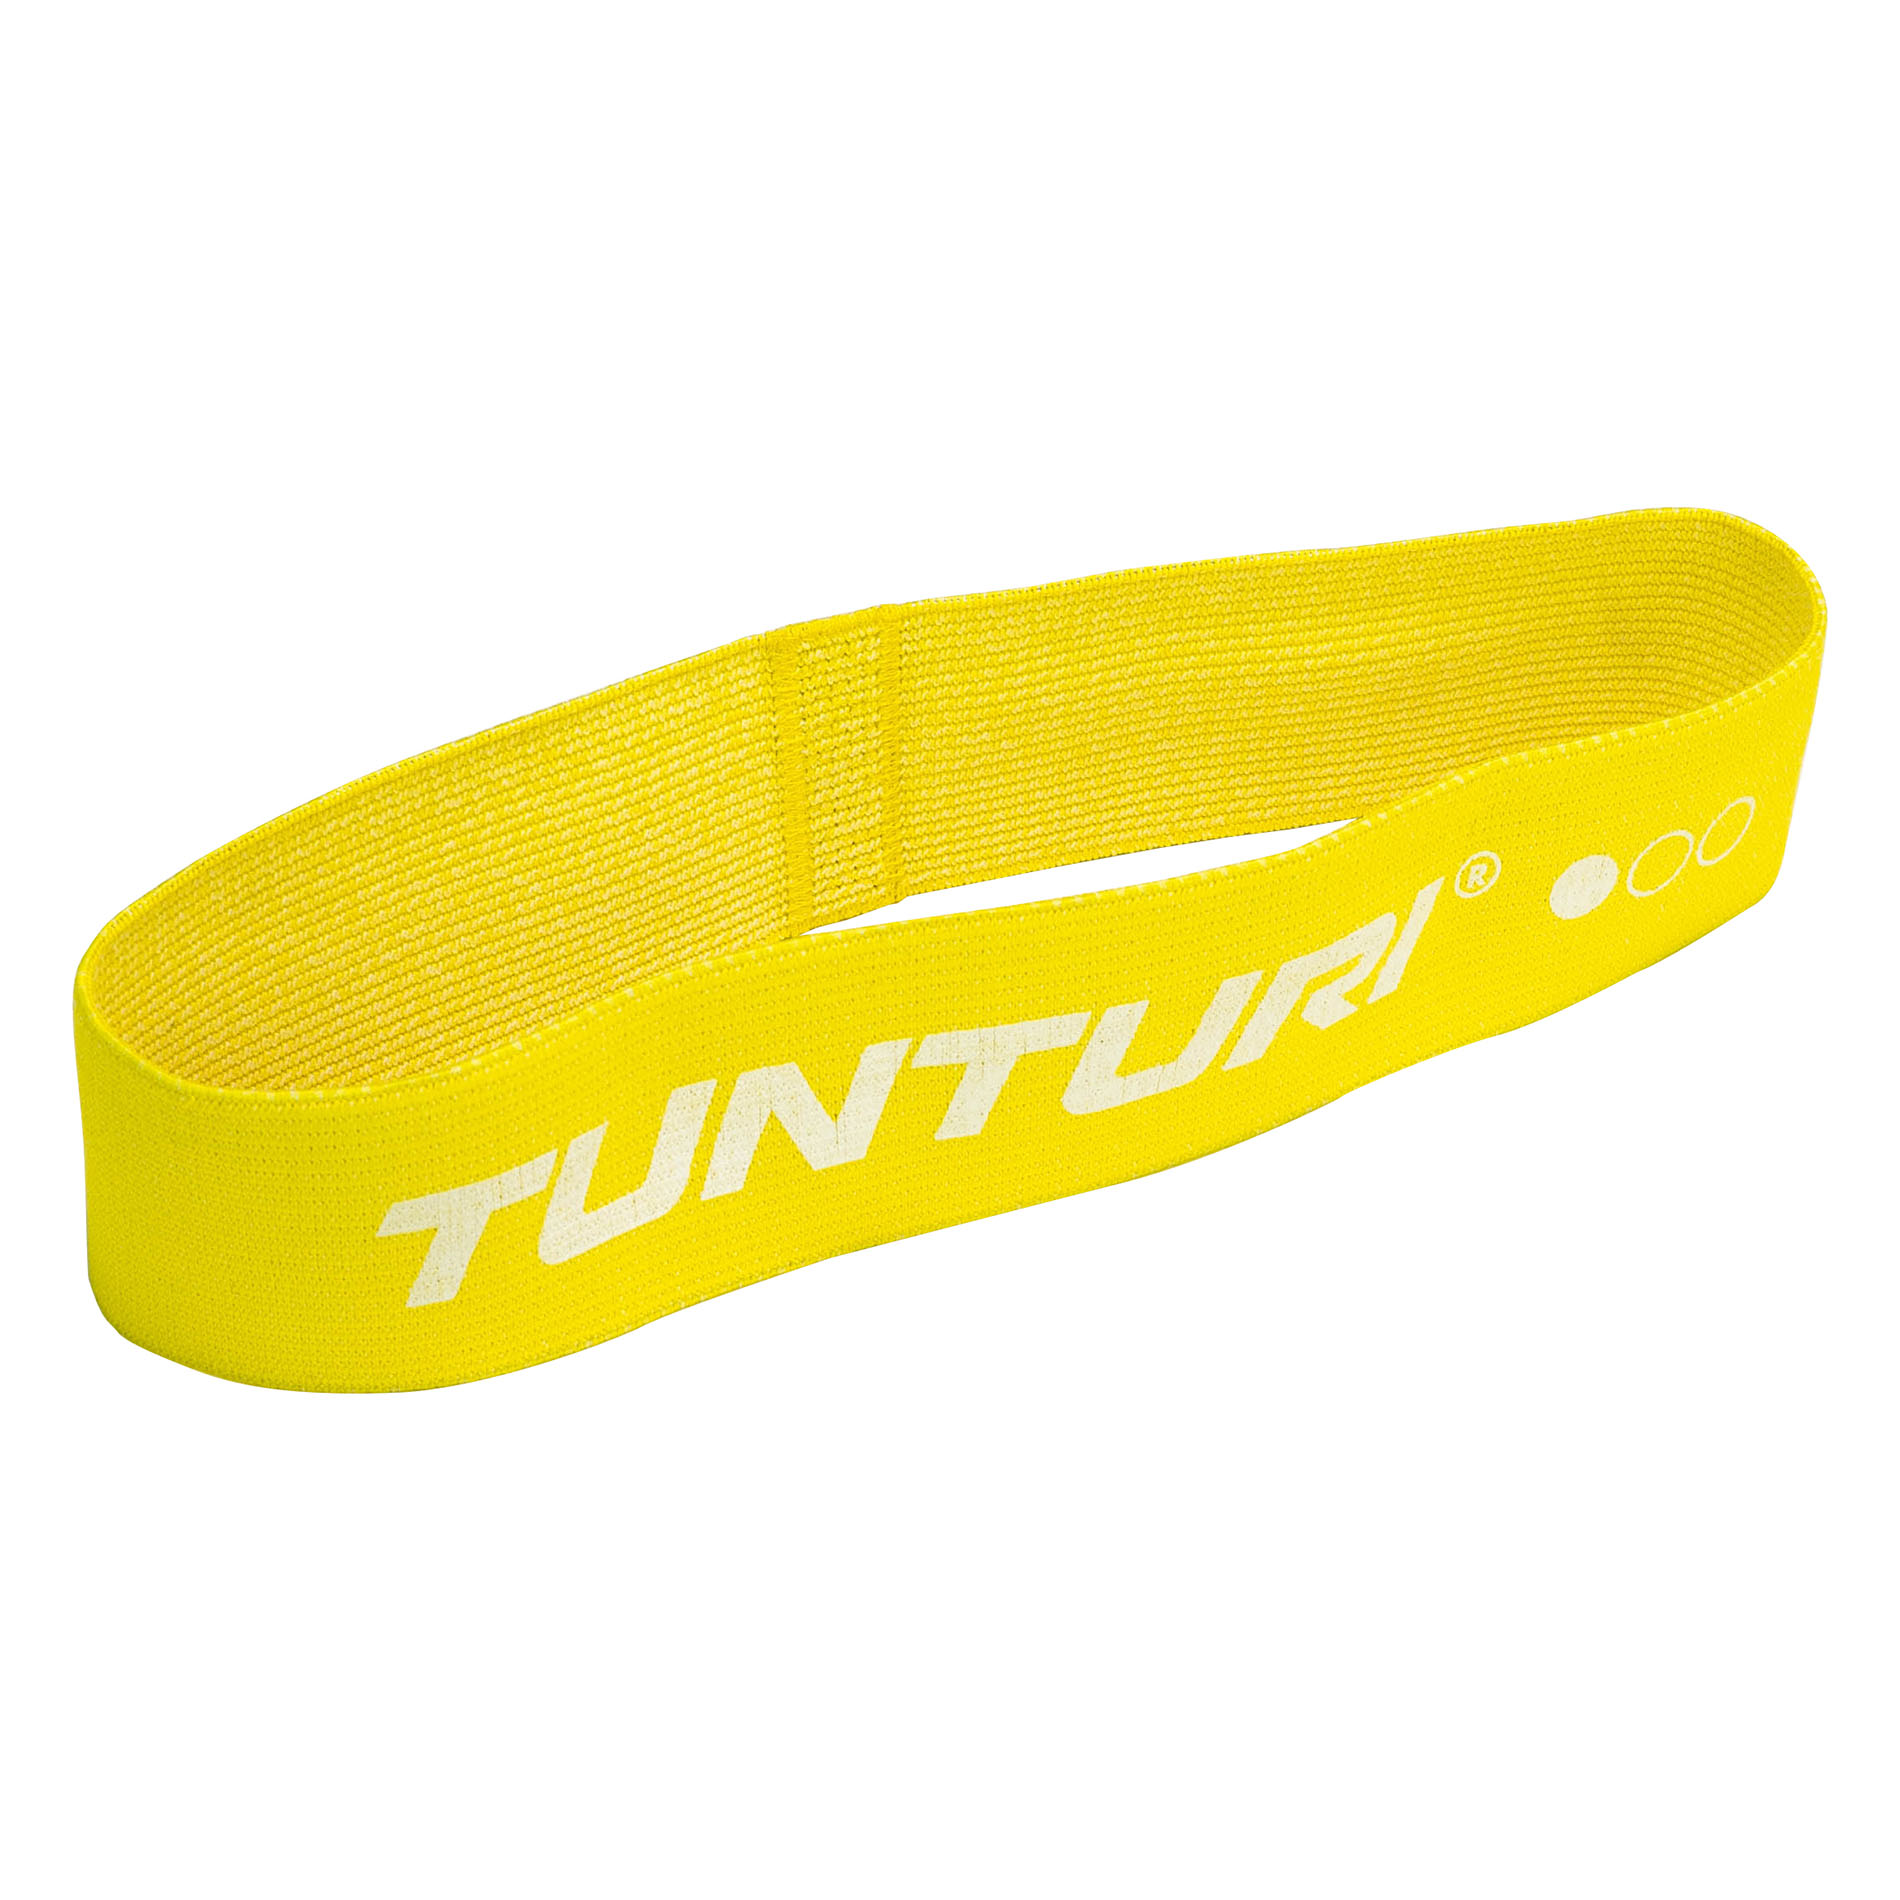 Textile Resistance Band, Light, Yellow